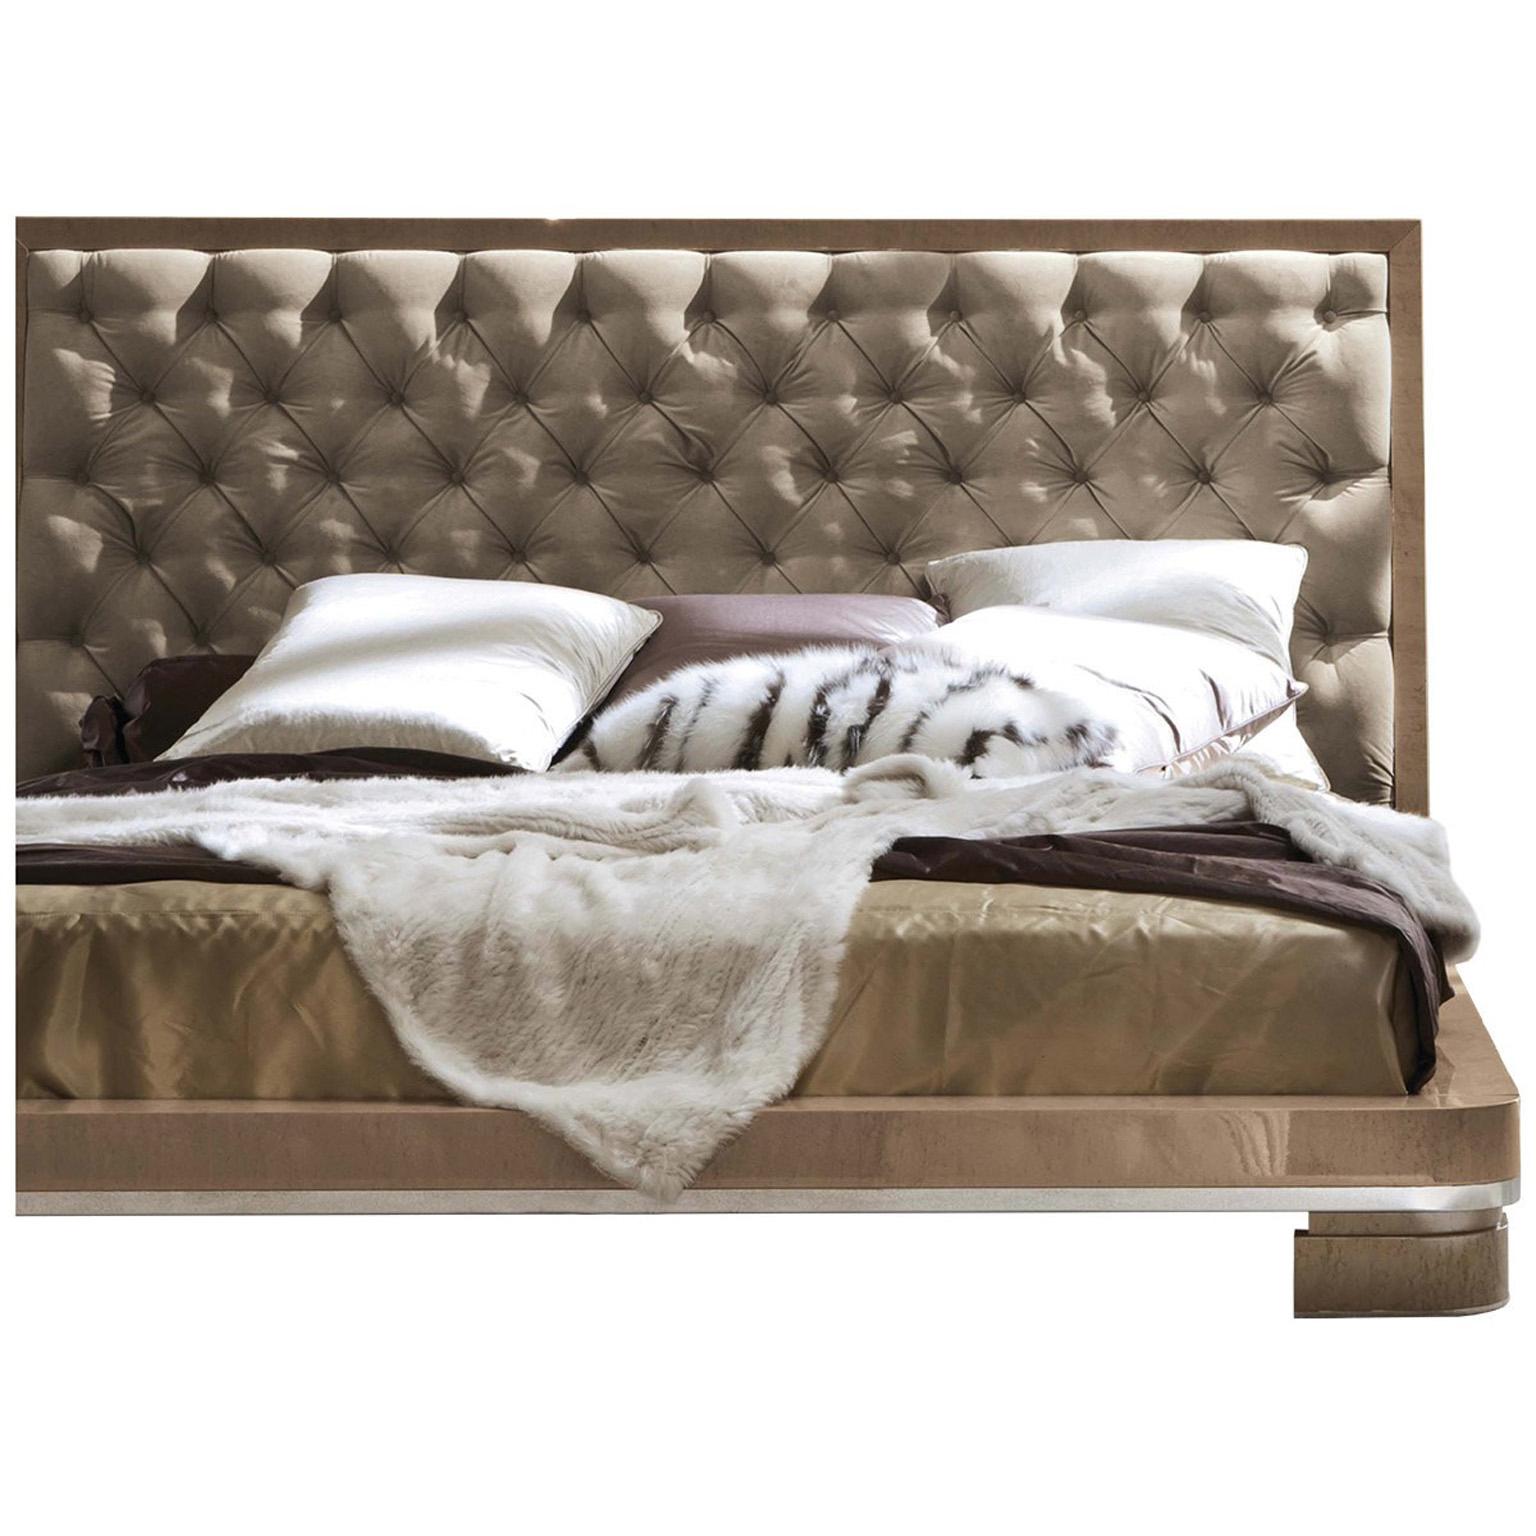 Giorgio Collection Italian Sunrise King size bed with upholstered tufted leather headboard in high gloss champagne bird’s-eye maple frame.
Chrome stainless steel feet.

Orthopedic slat included 

Measures: Width 86.50